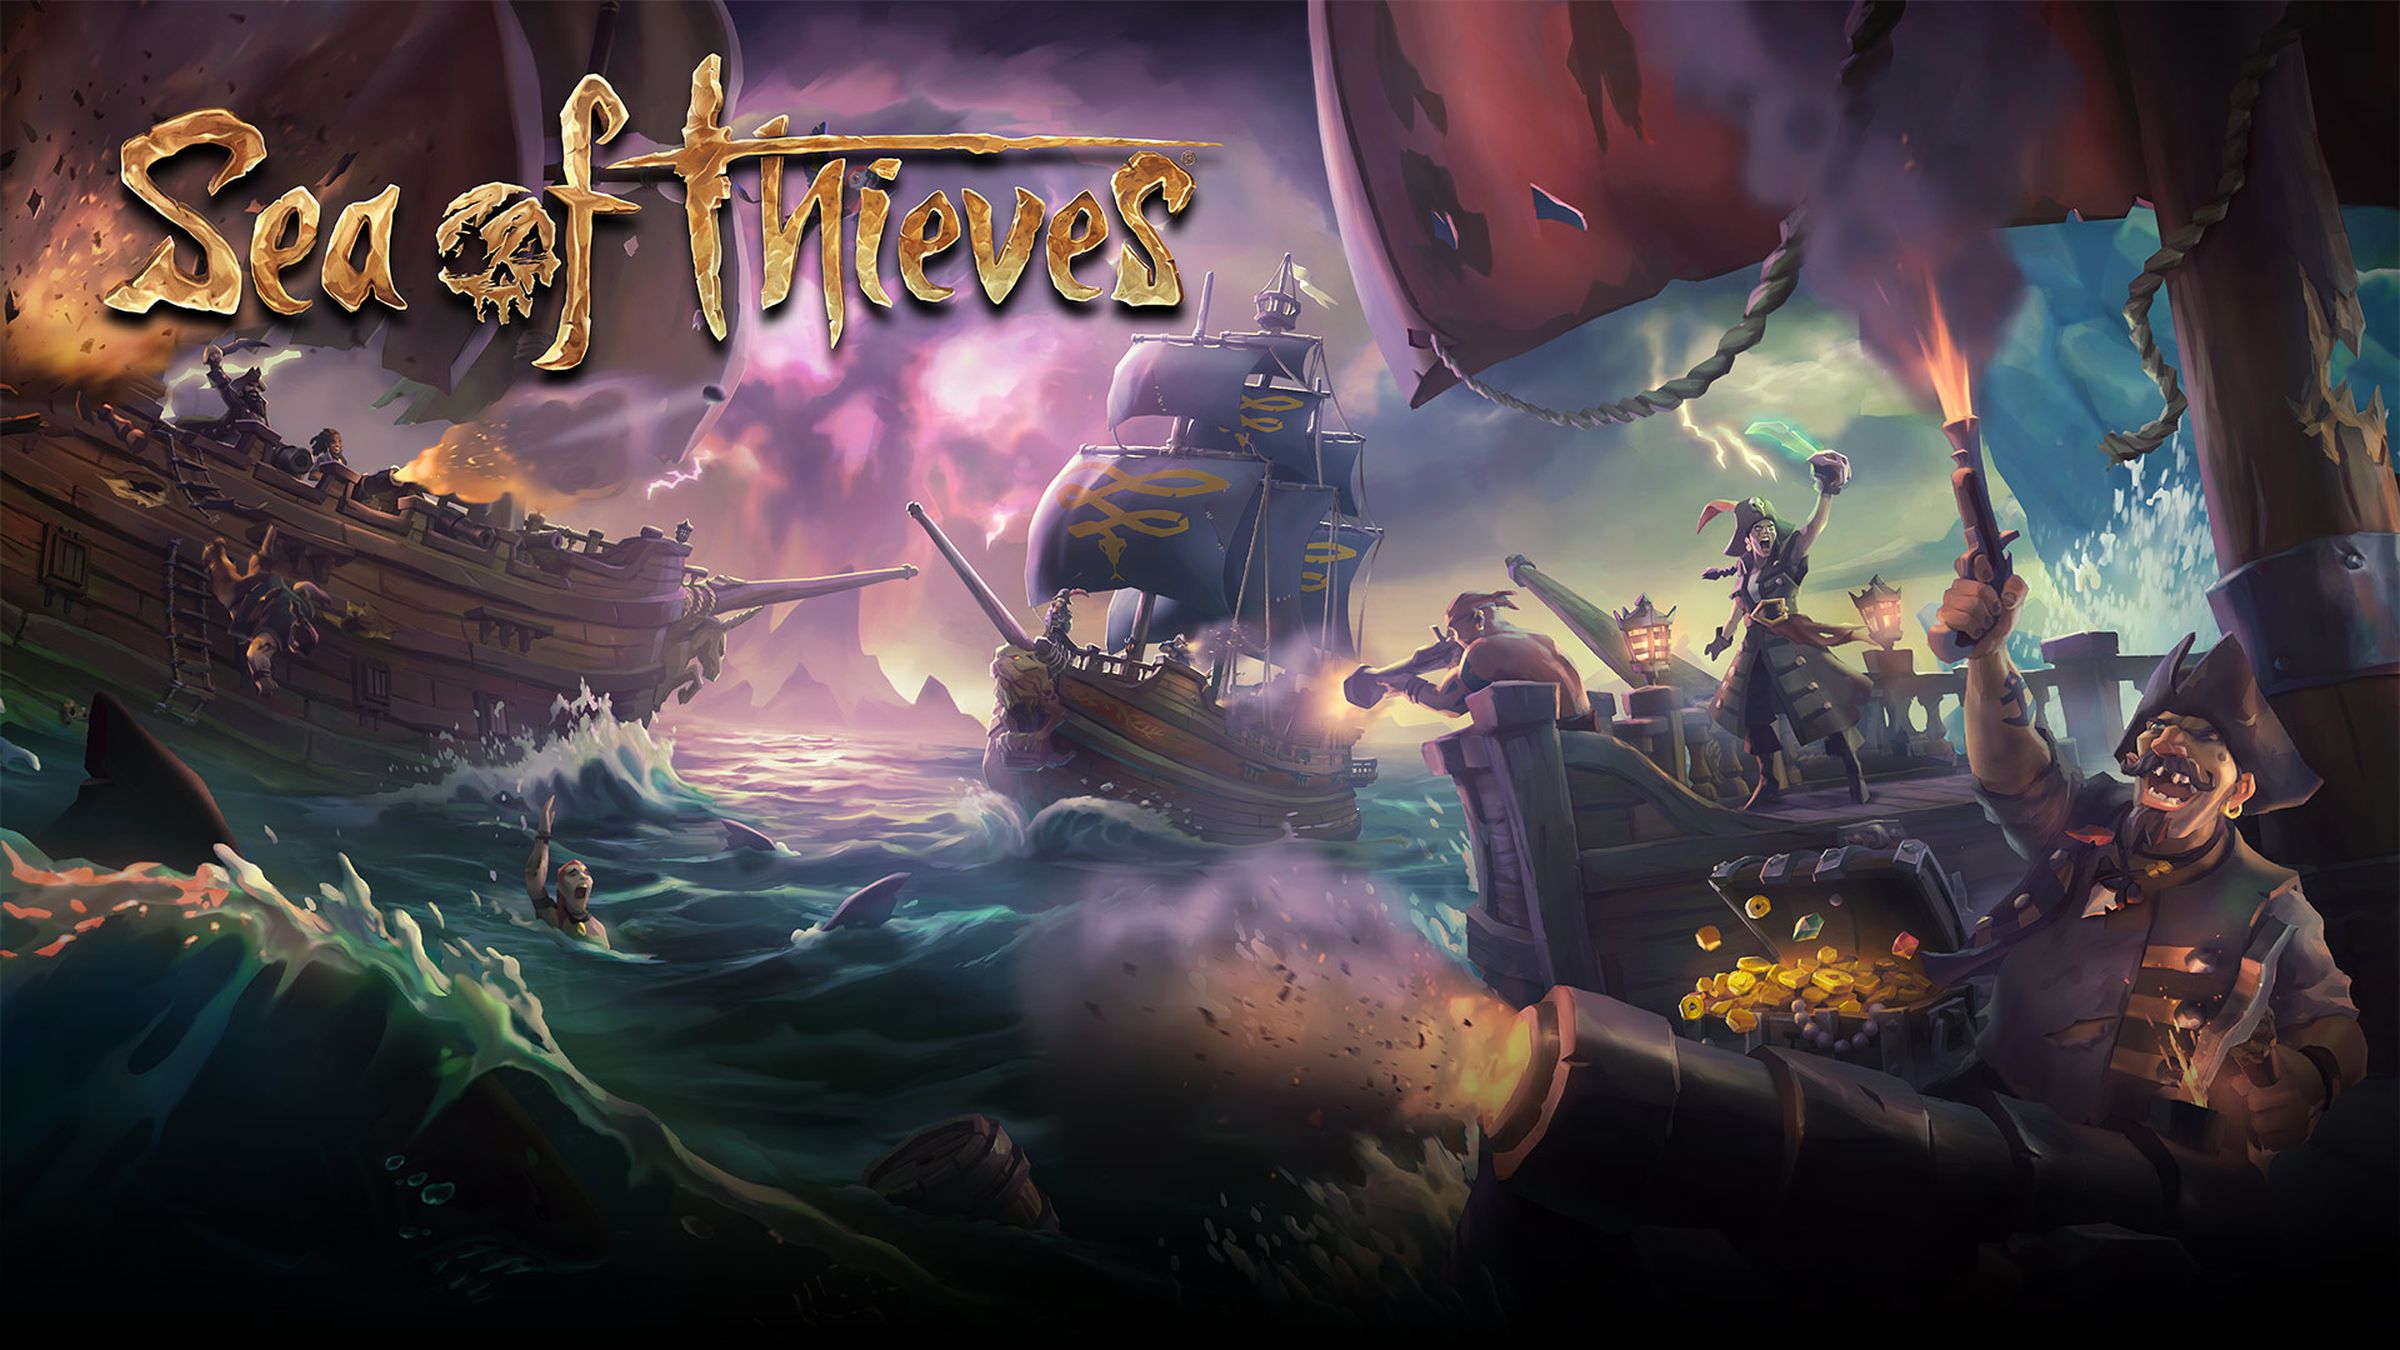 Sea of Thieves is part of the four Xbox games coming to rival platforms.